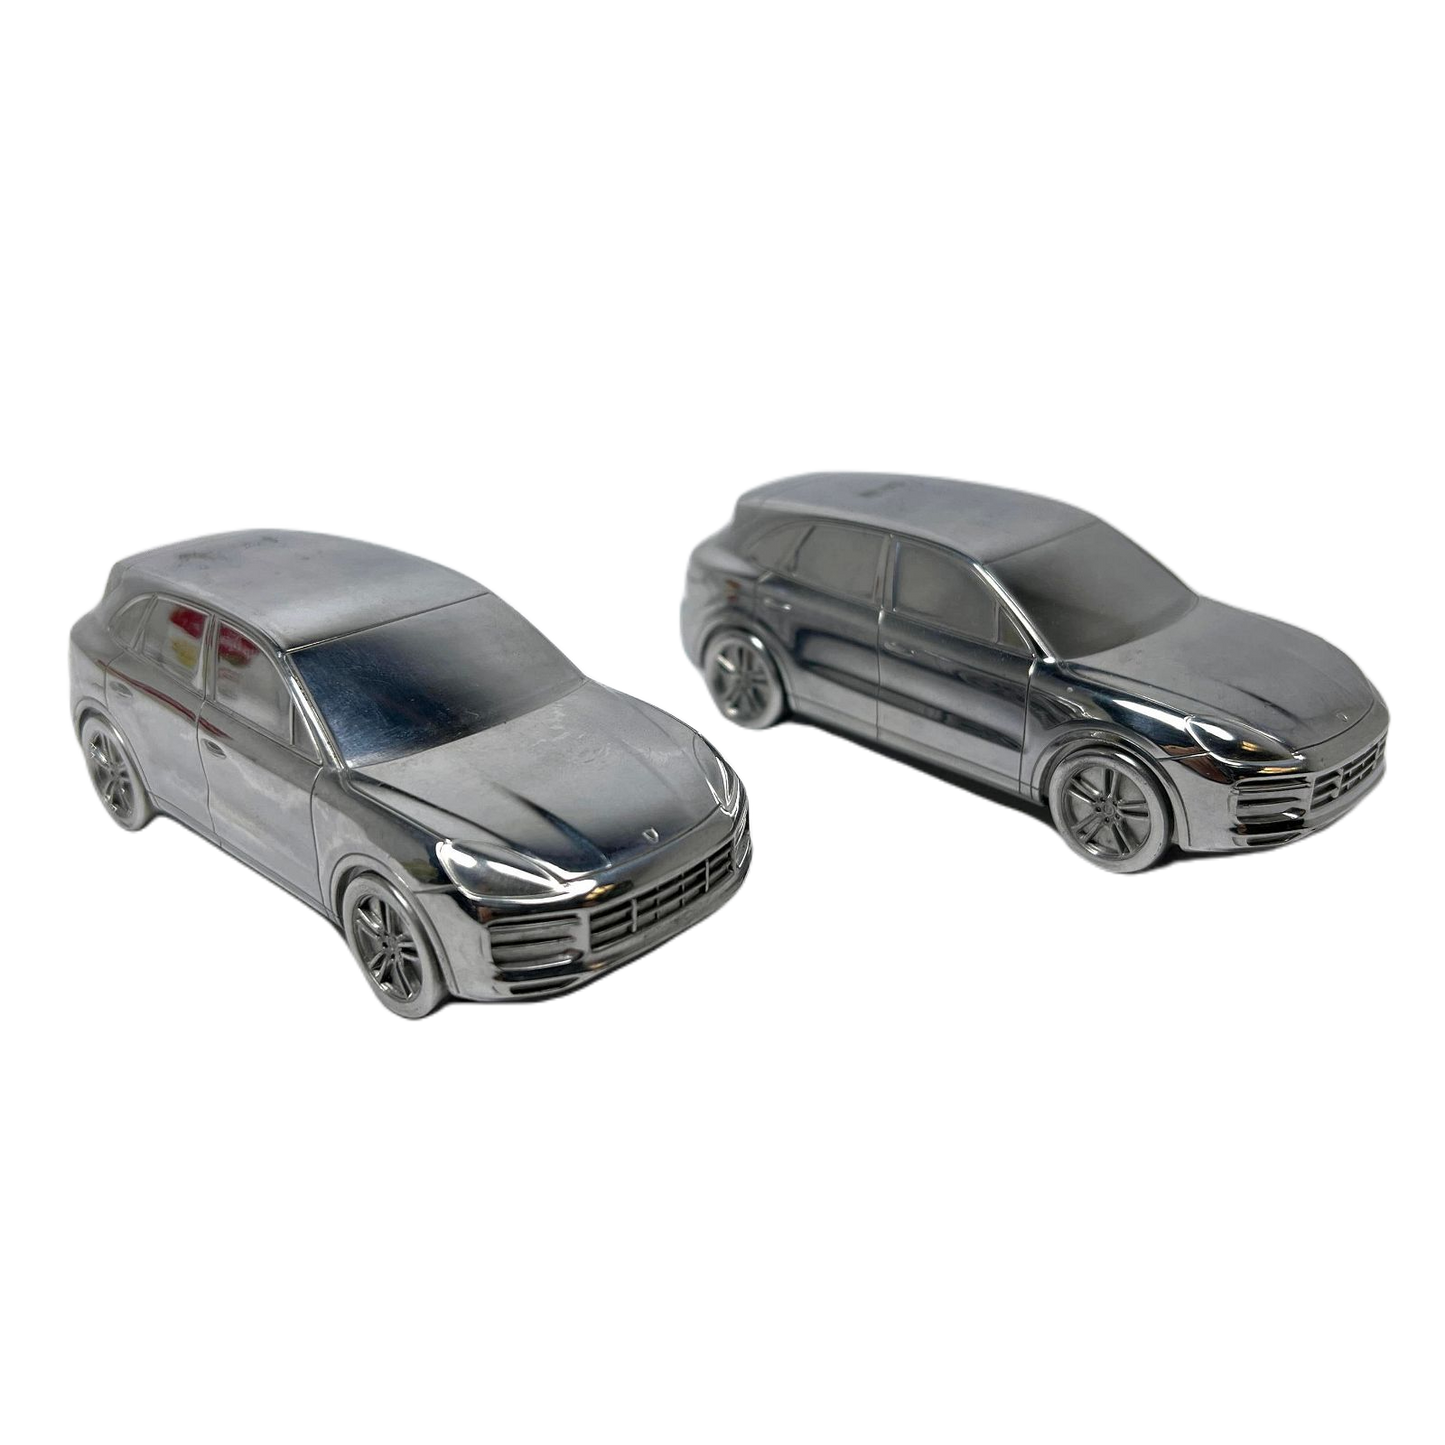 Porsche Cayenne Turbo Model Cars - Limited Edition